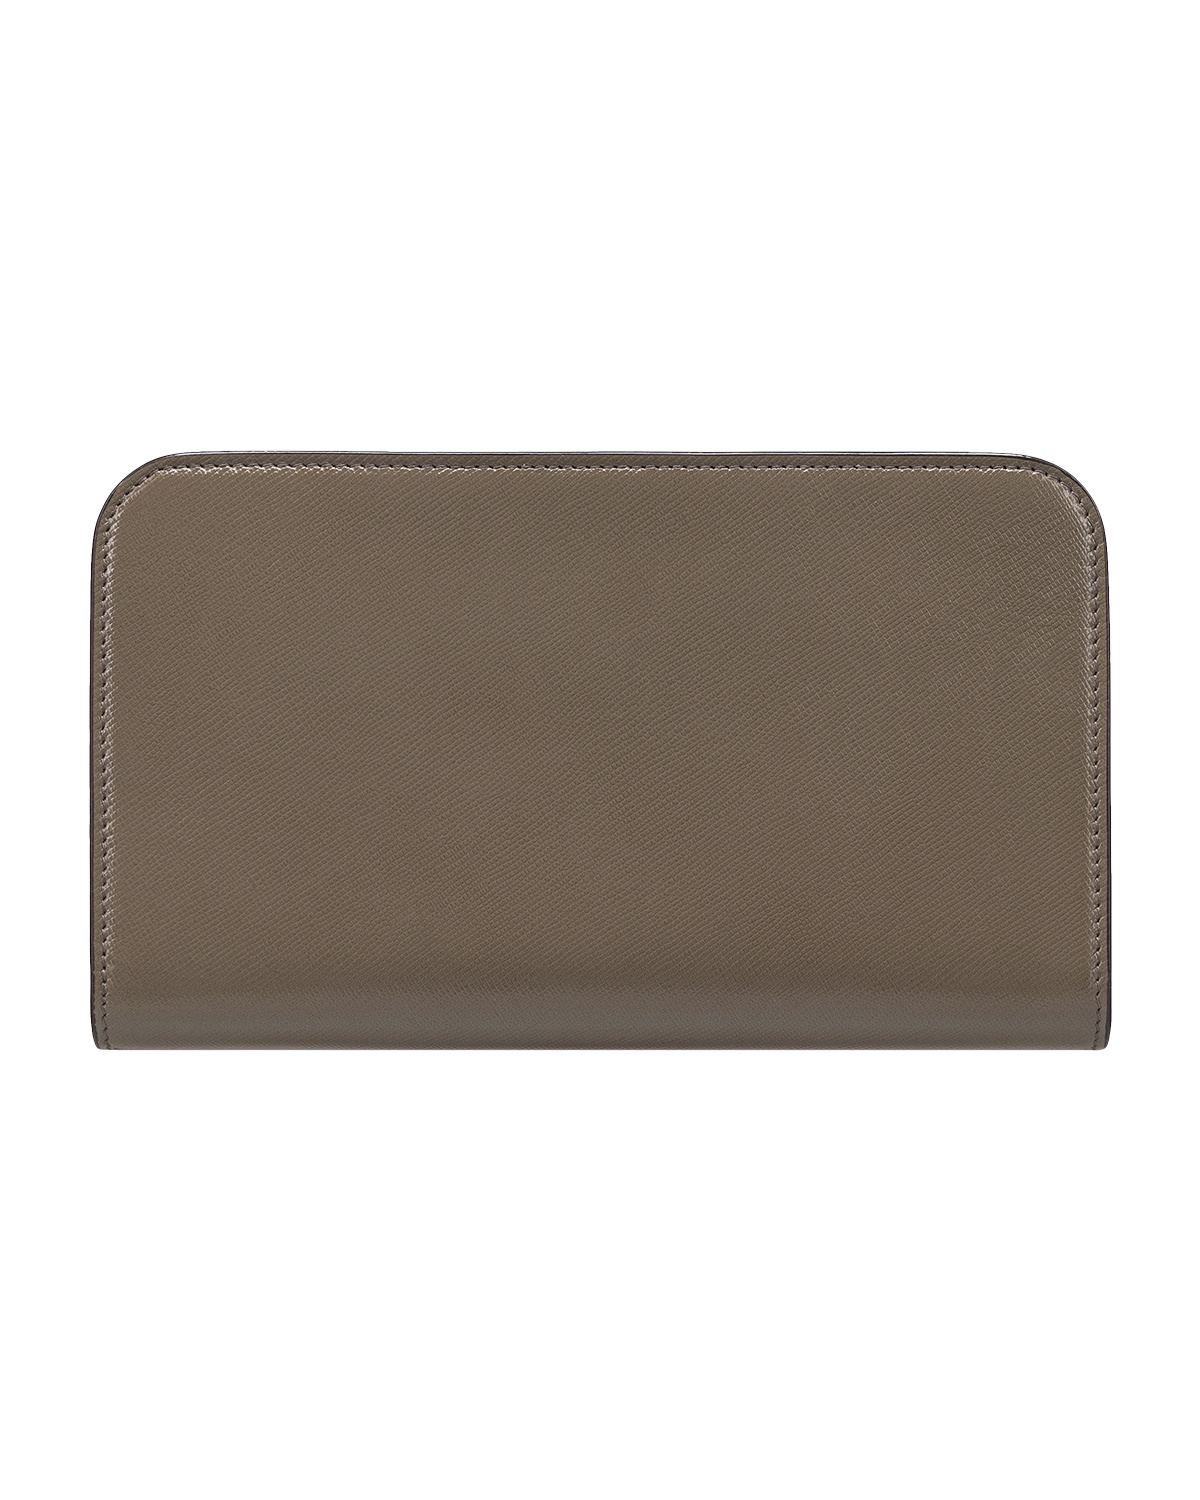 TAUPE TRAVEL WALLET - 2